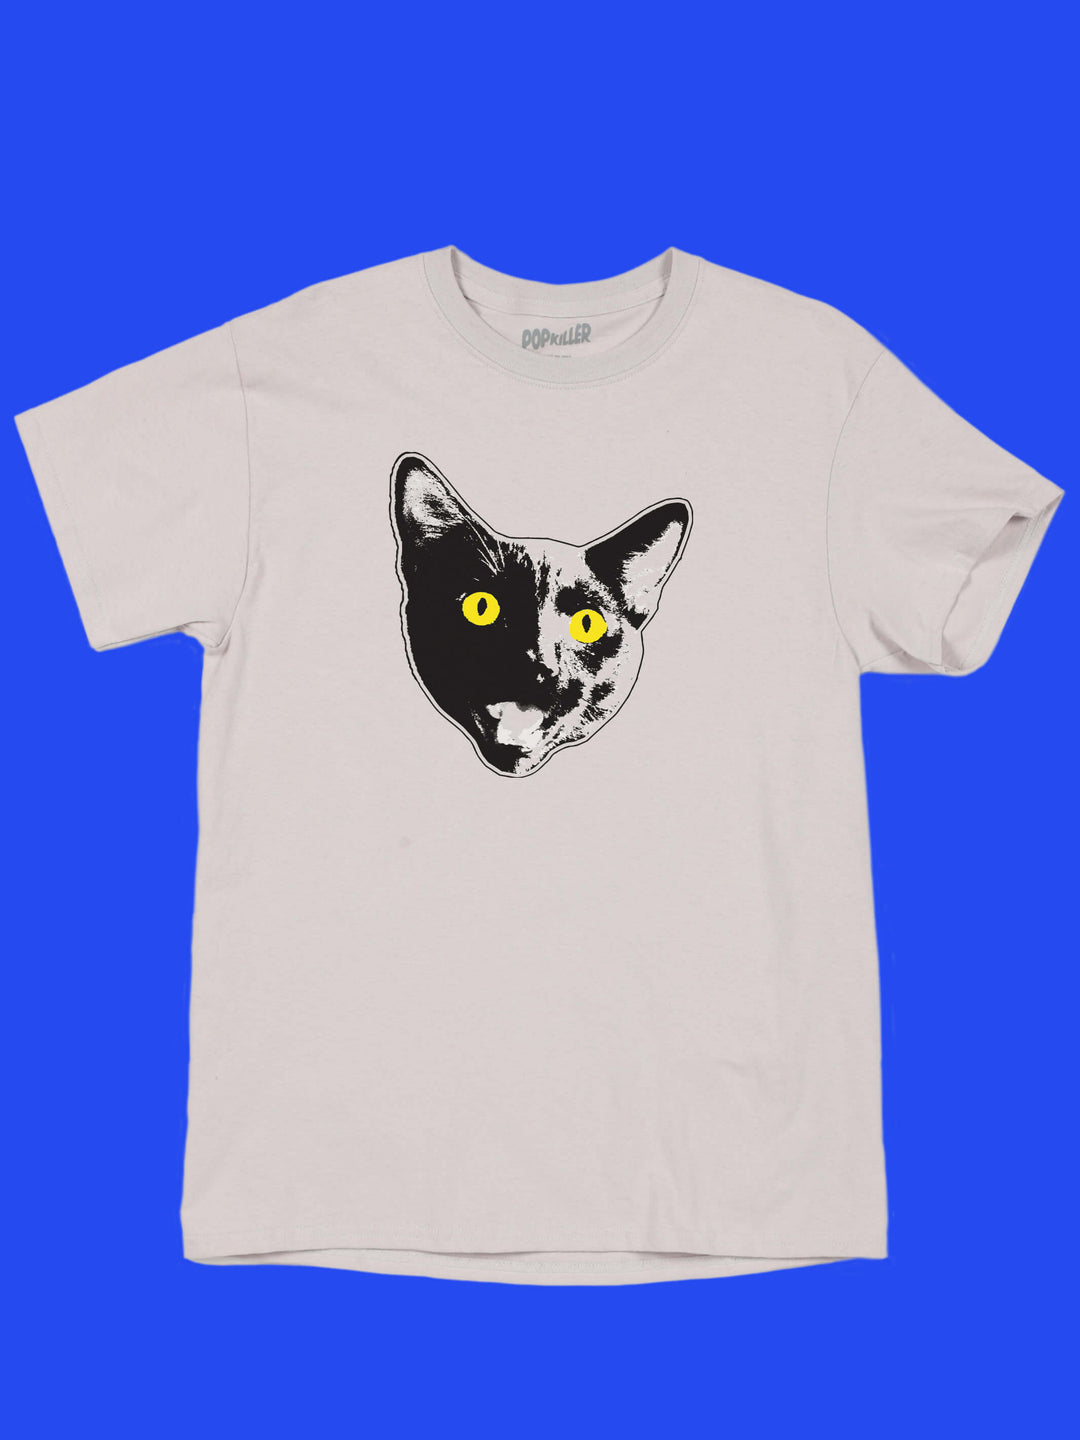 A grey graphic t-shirt with a screaming black cat on it.